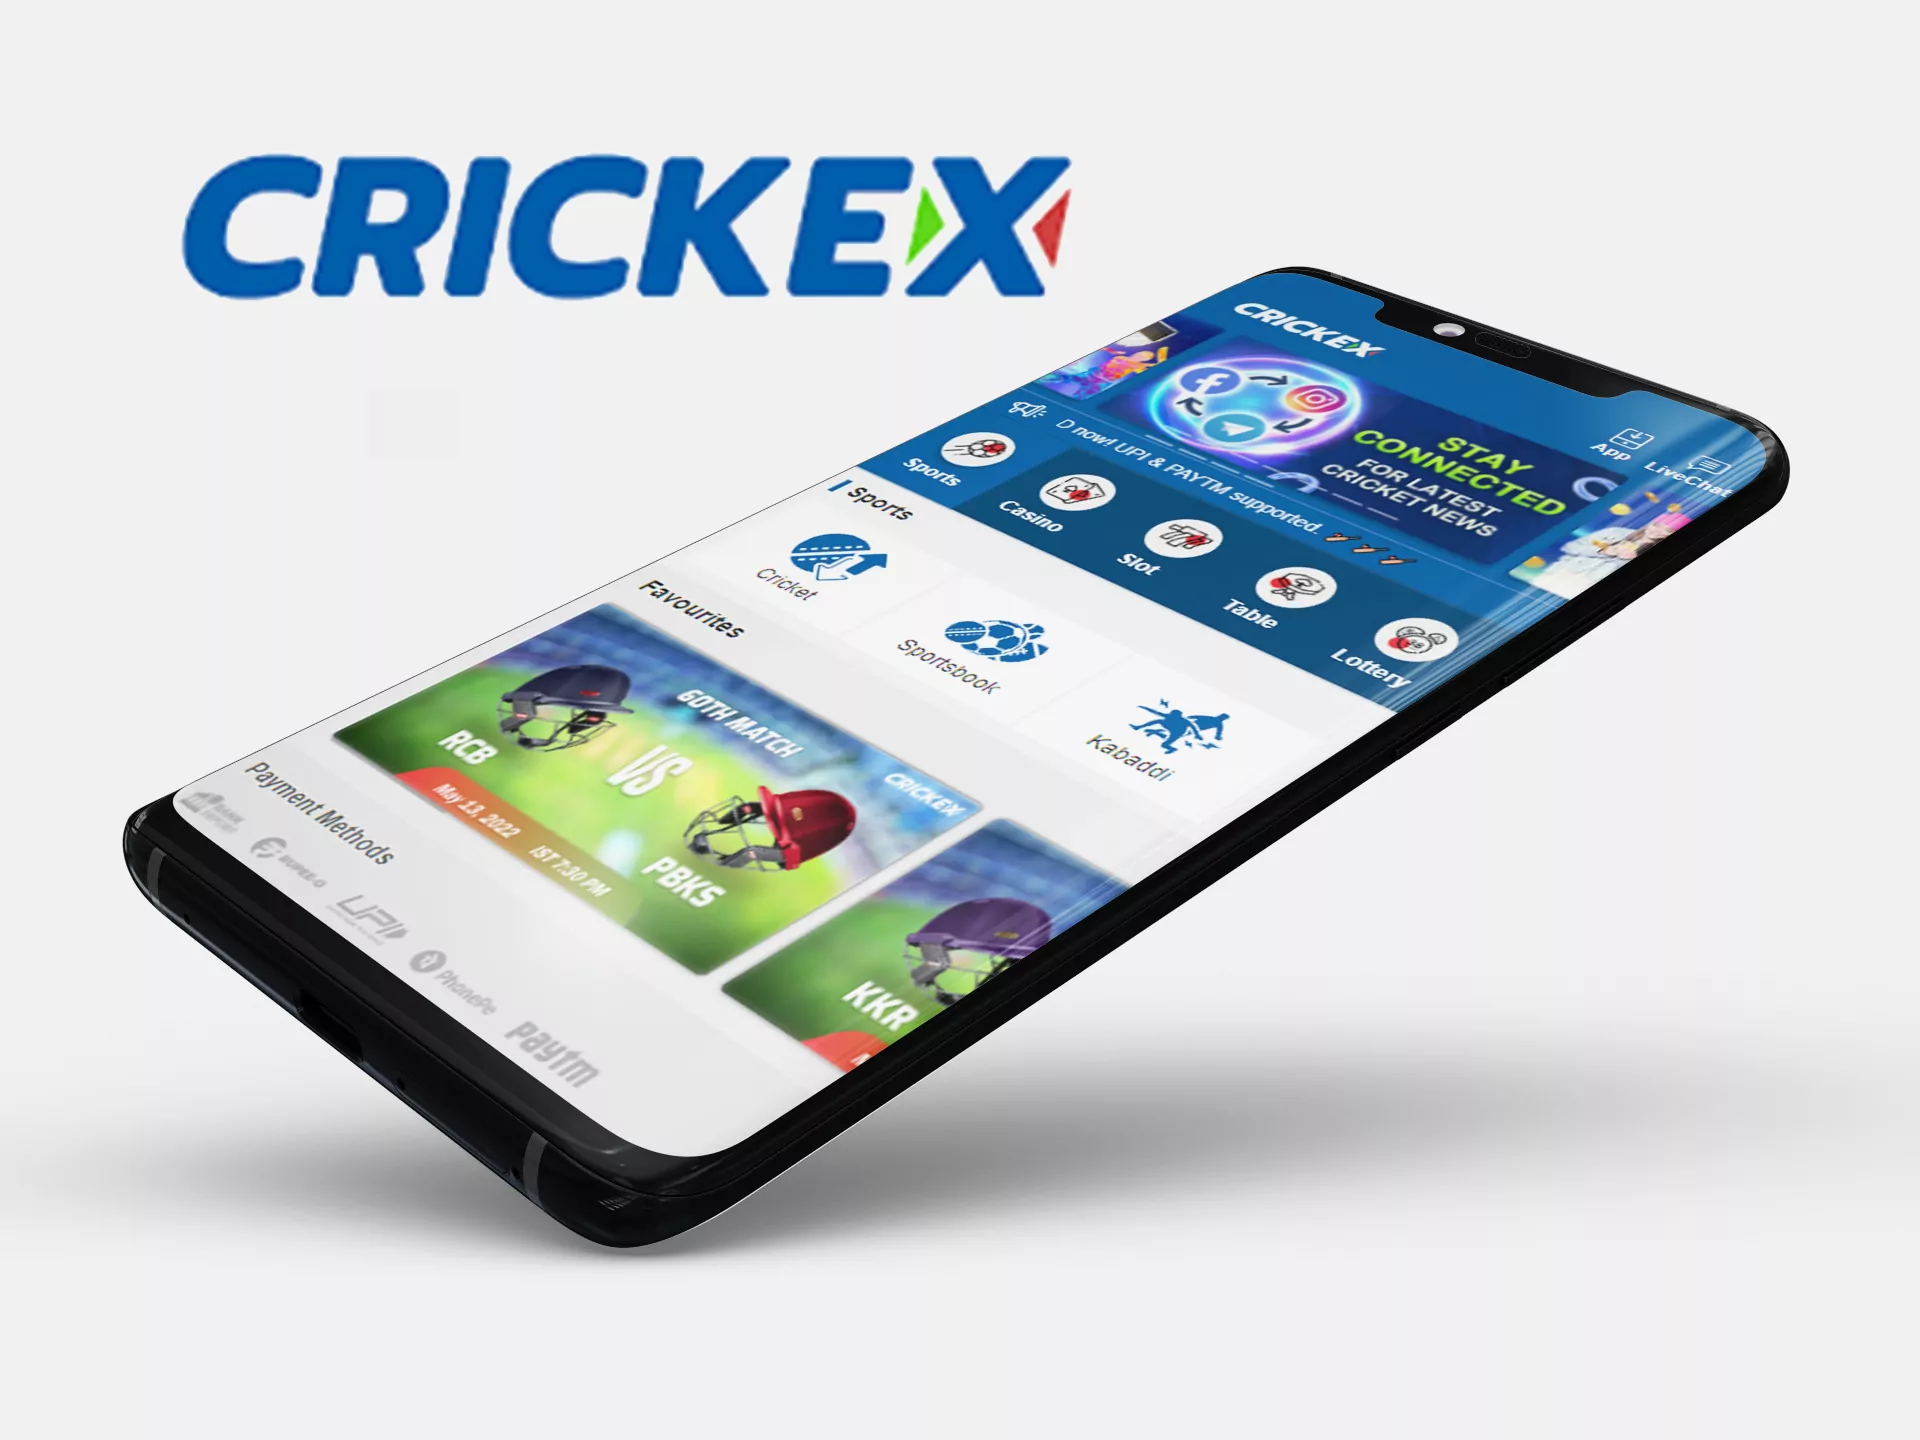 Crickex app is a new application on online betting market.